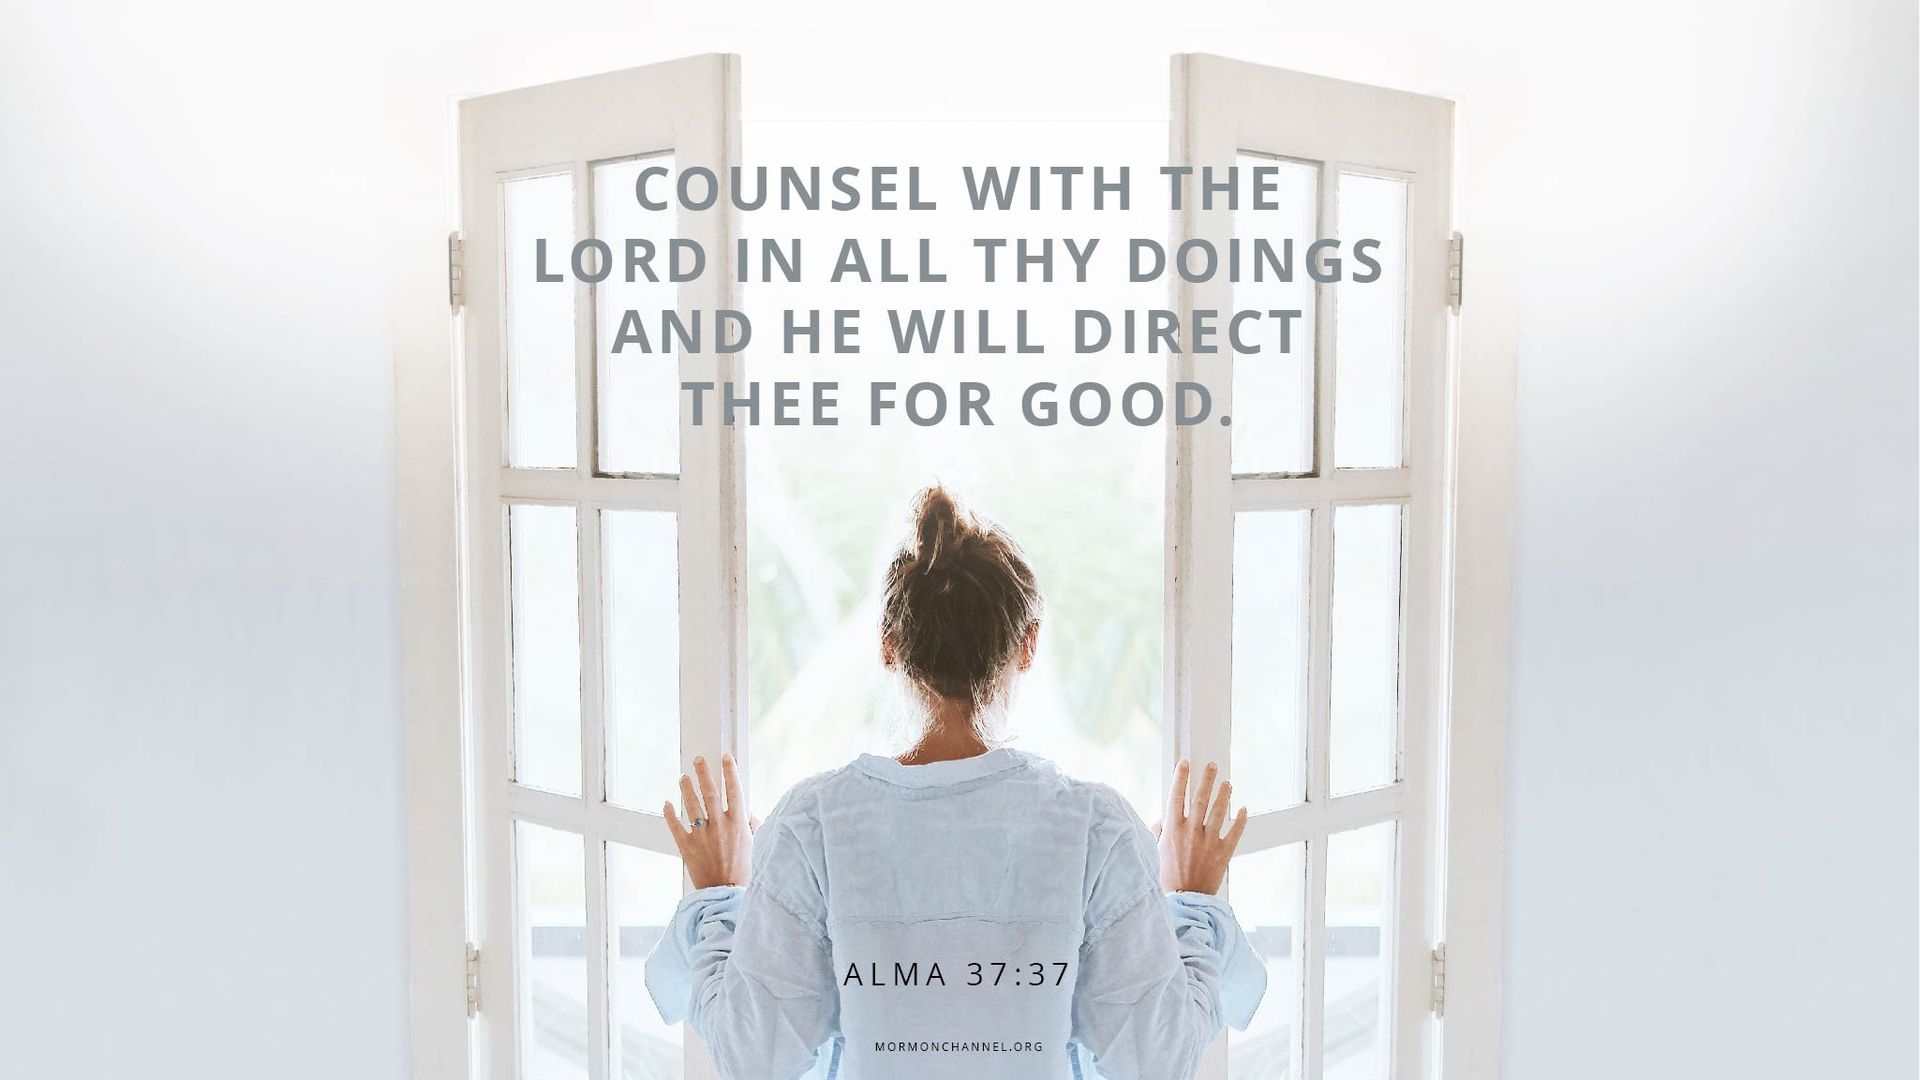 “Counsel with the Lord in all thy doings, and he will direct thee for good.”—Alma 37:37